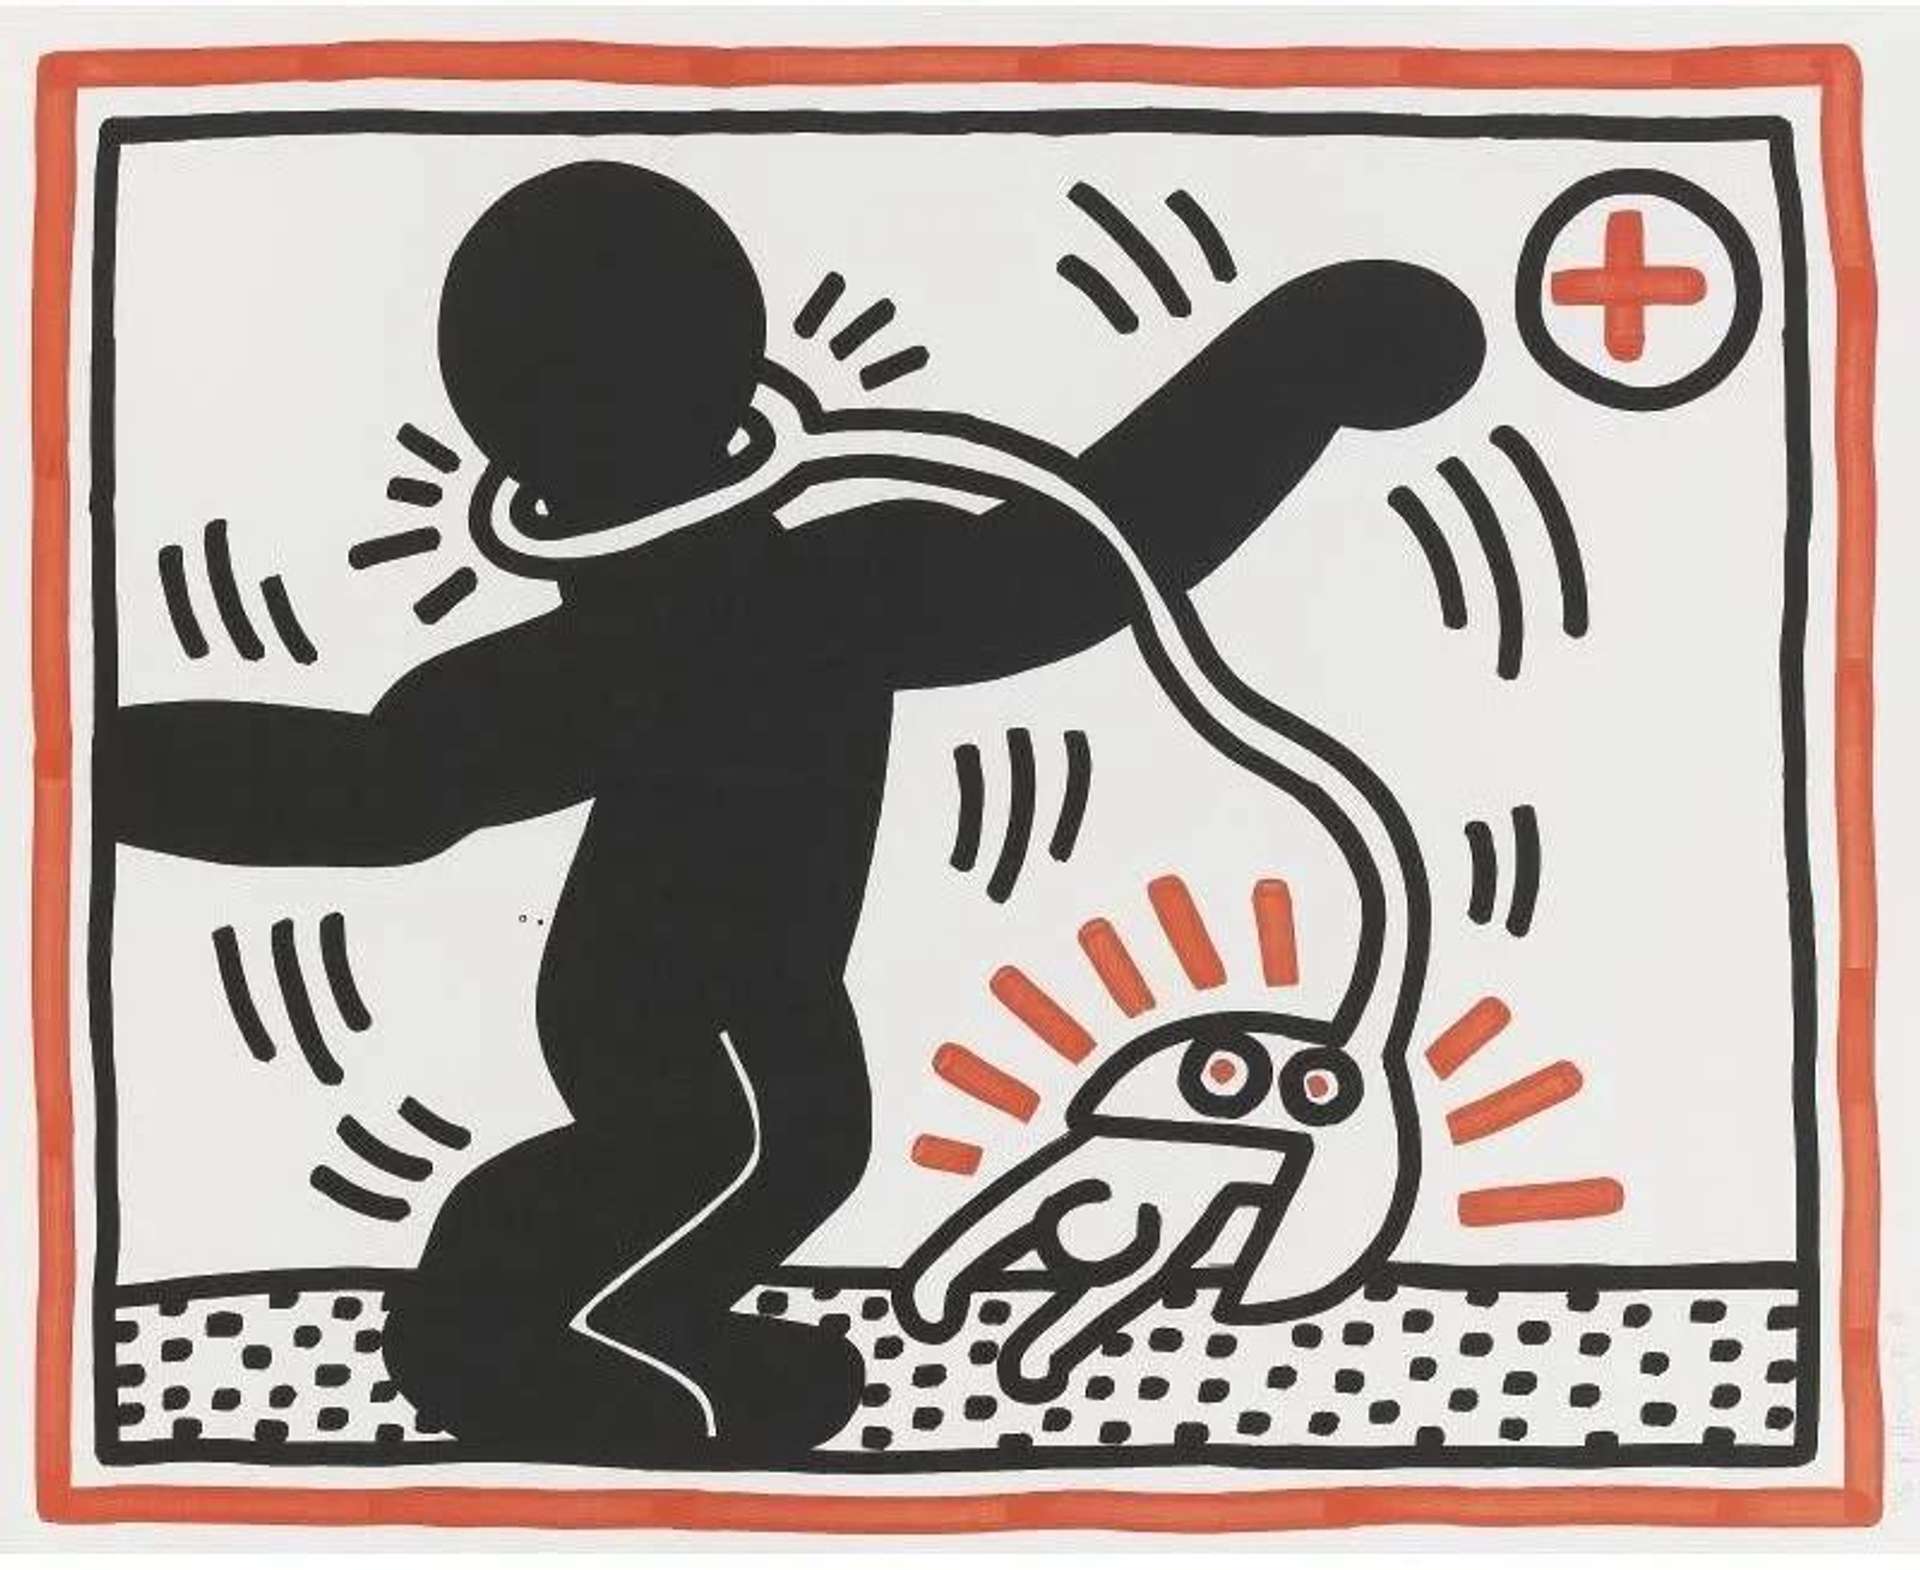 Keith Haring’s Free South Africa 1. A Pop Art screenprint of a black figure raising its foot, stepping on the outline of a white figure.